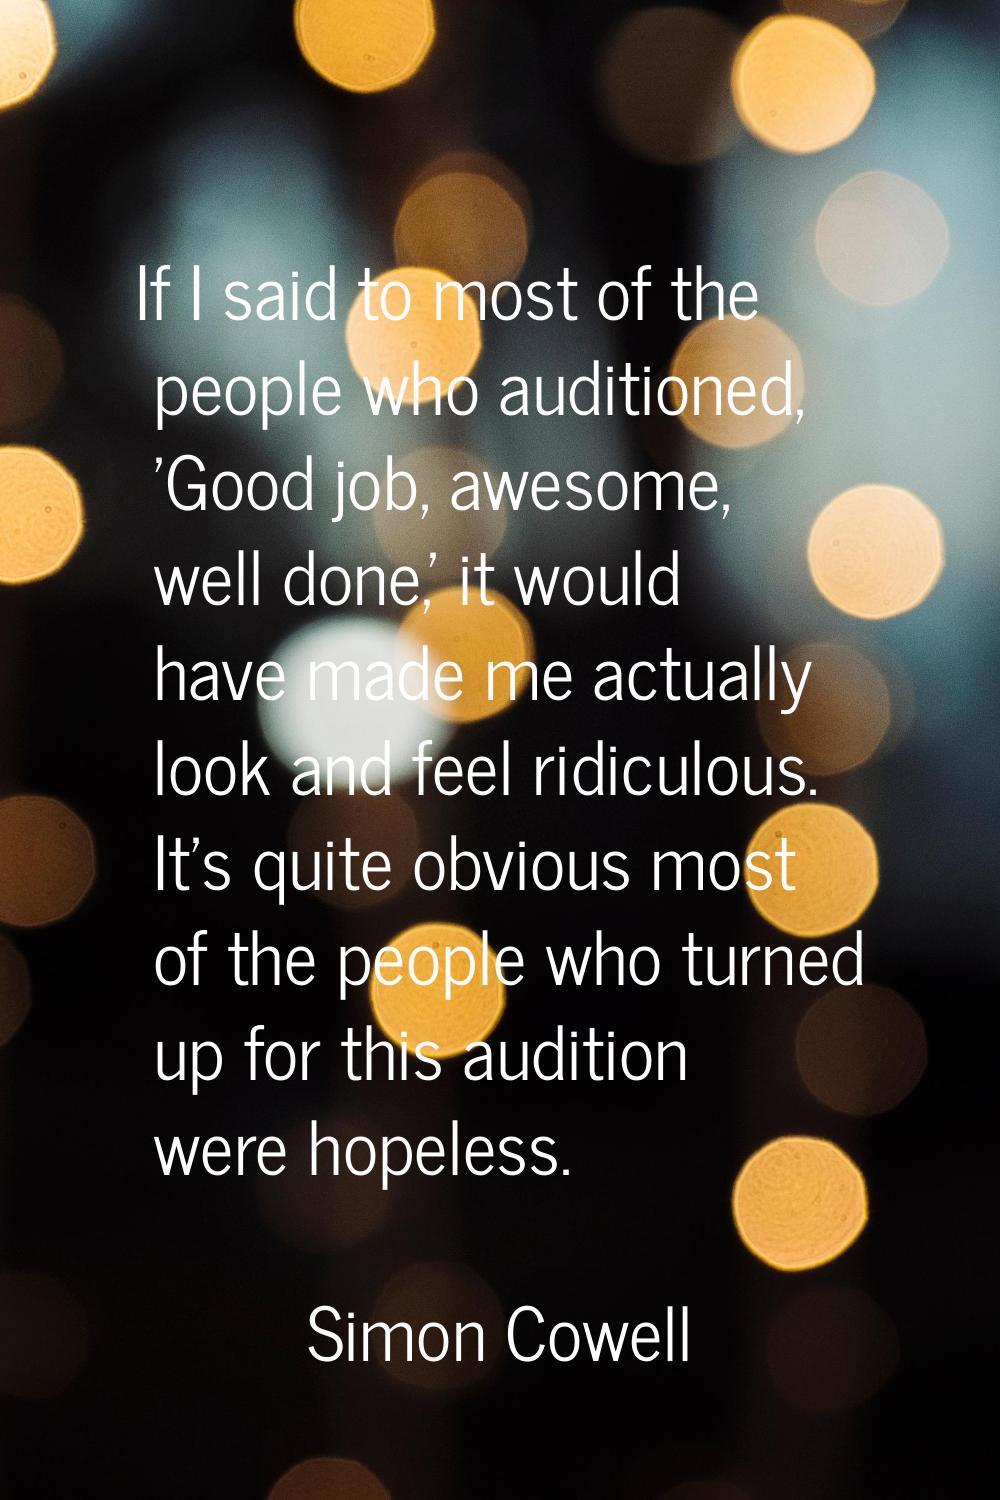 If I said to most of the people who auditioned, 'Good job, awesome, well done,' it would have made 